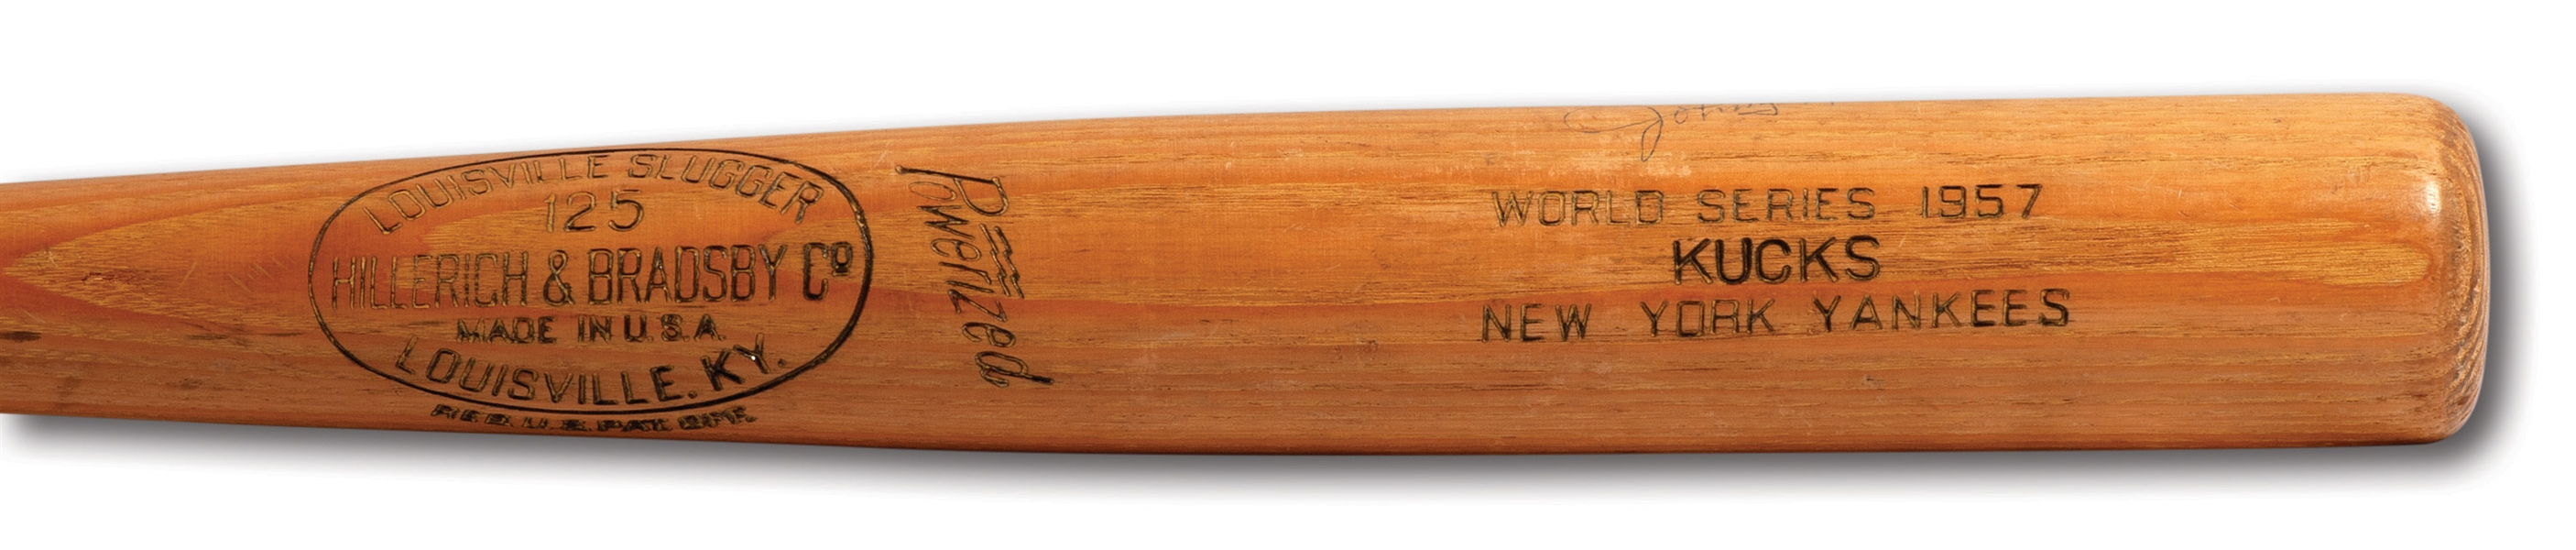 JOHNNY KUCKS AUTOGRAPHED 1957 WORLD SERIES HILLERICH & BRADSBY PROFESSIONAL MODEL GAME ISSUED BAT